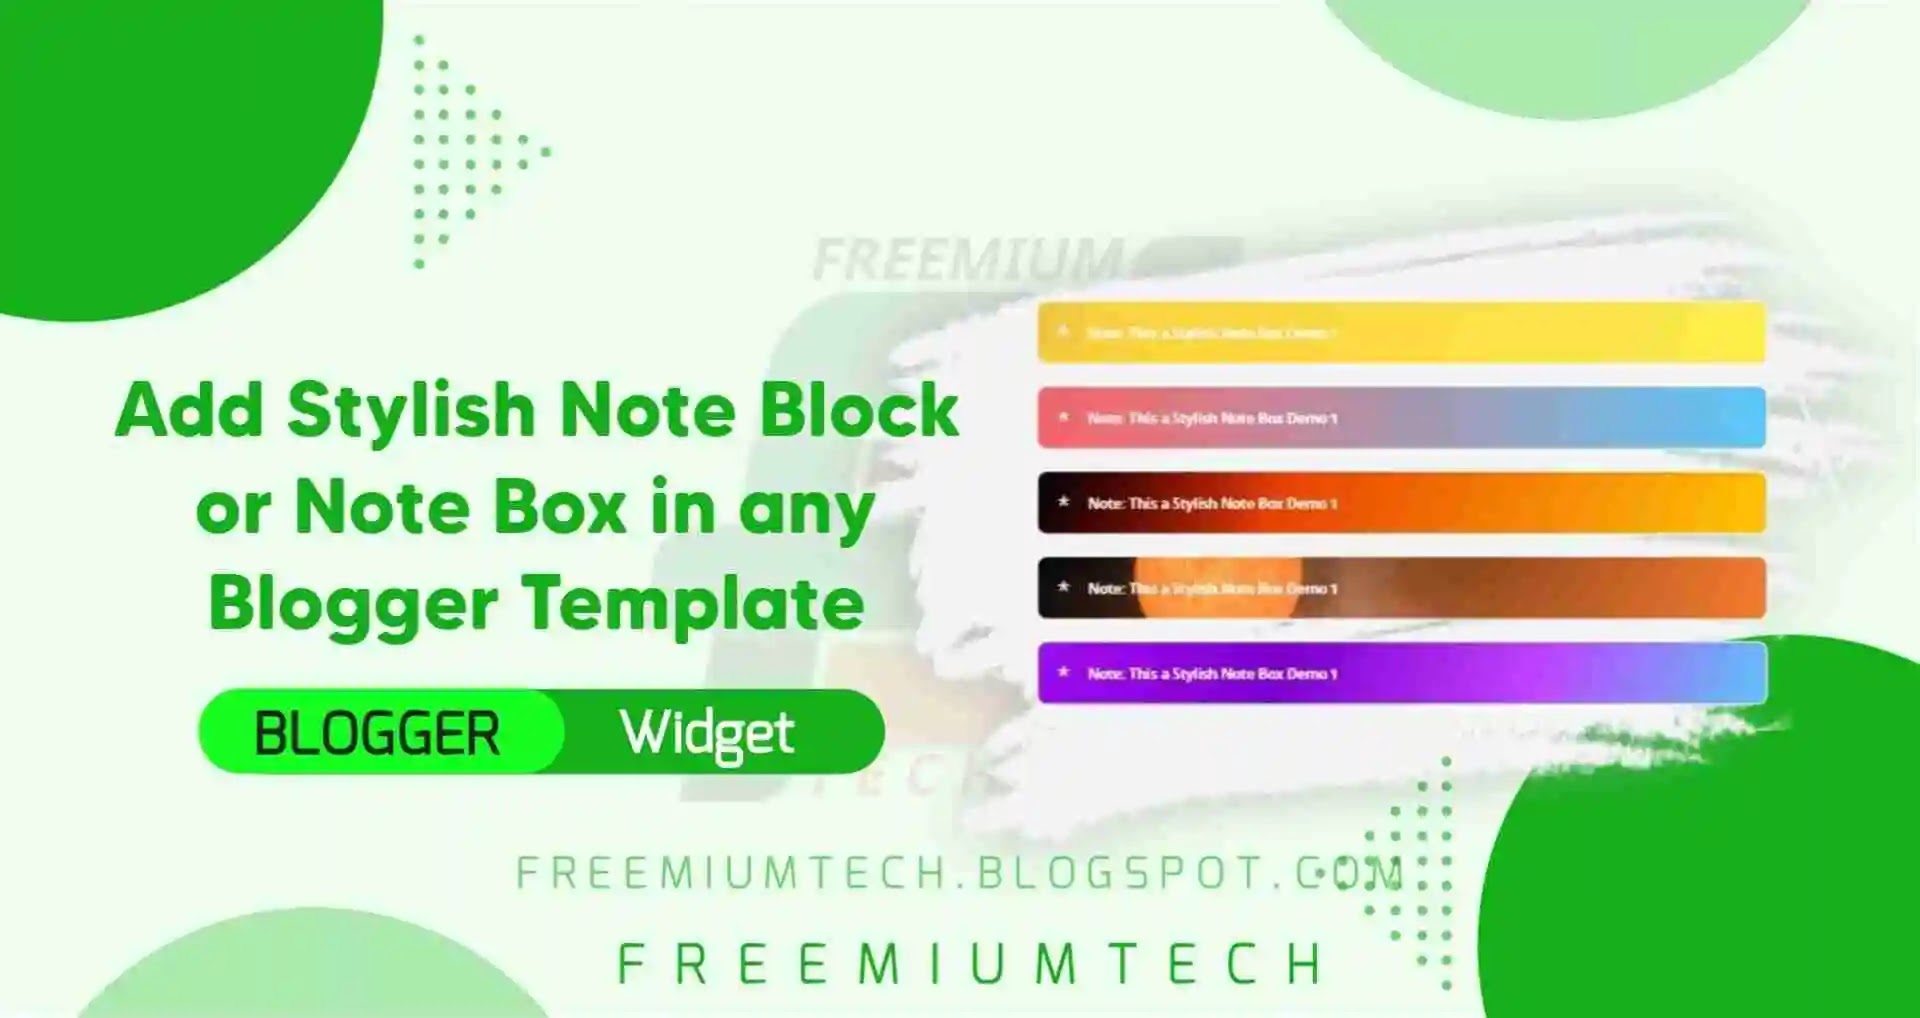 Add Stylish Note Block or Note Box in any Blogger Template